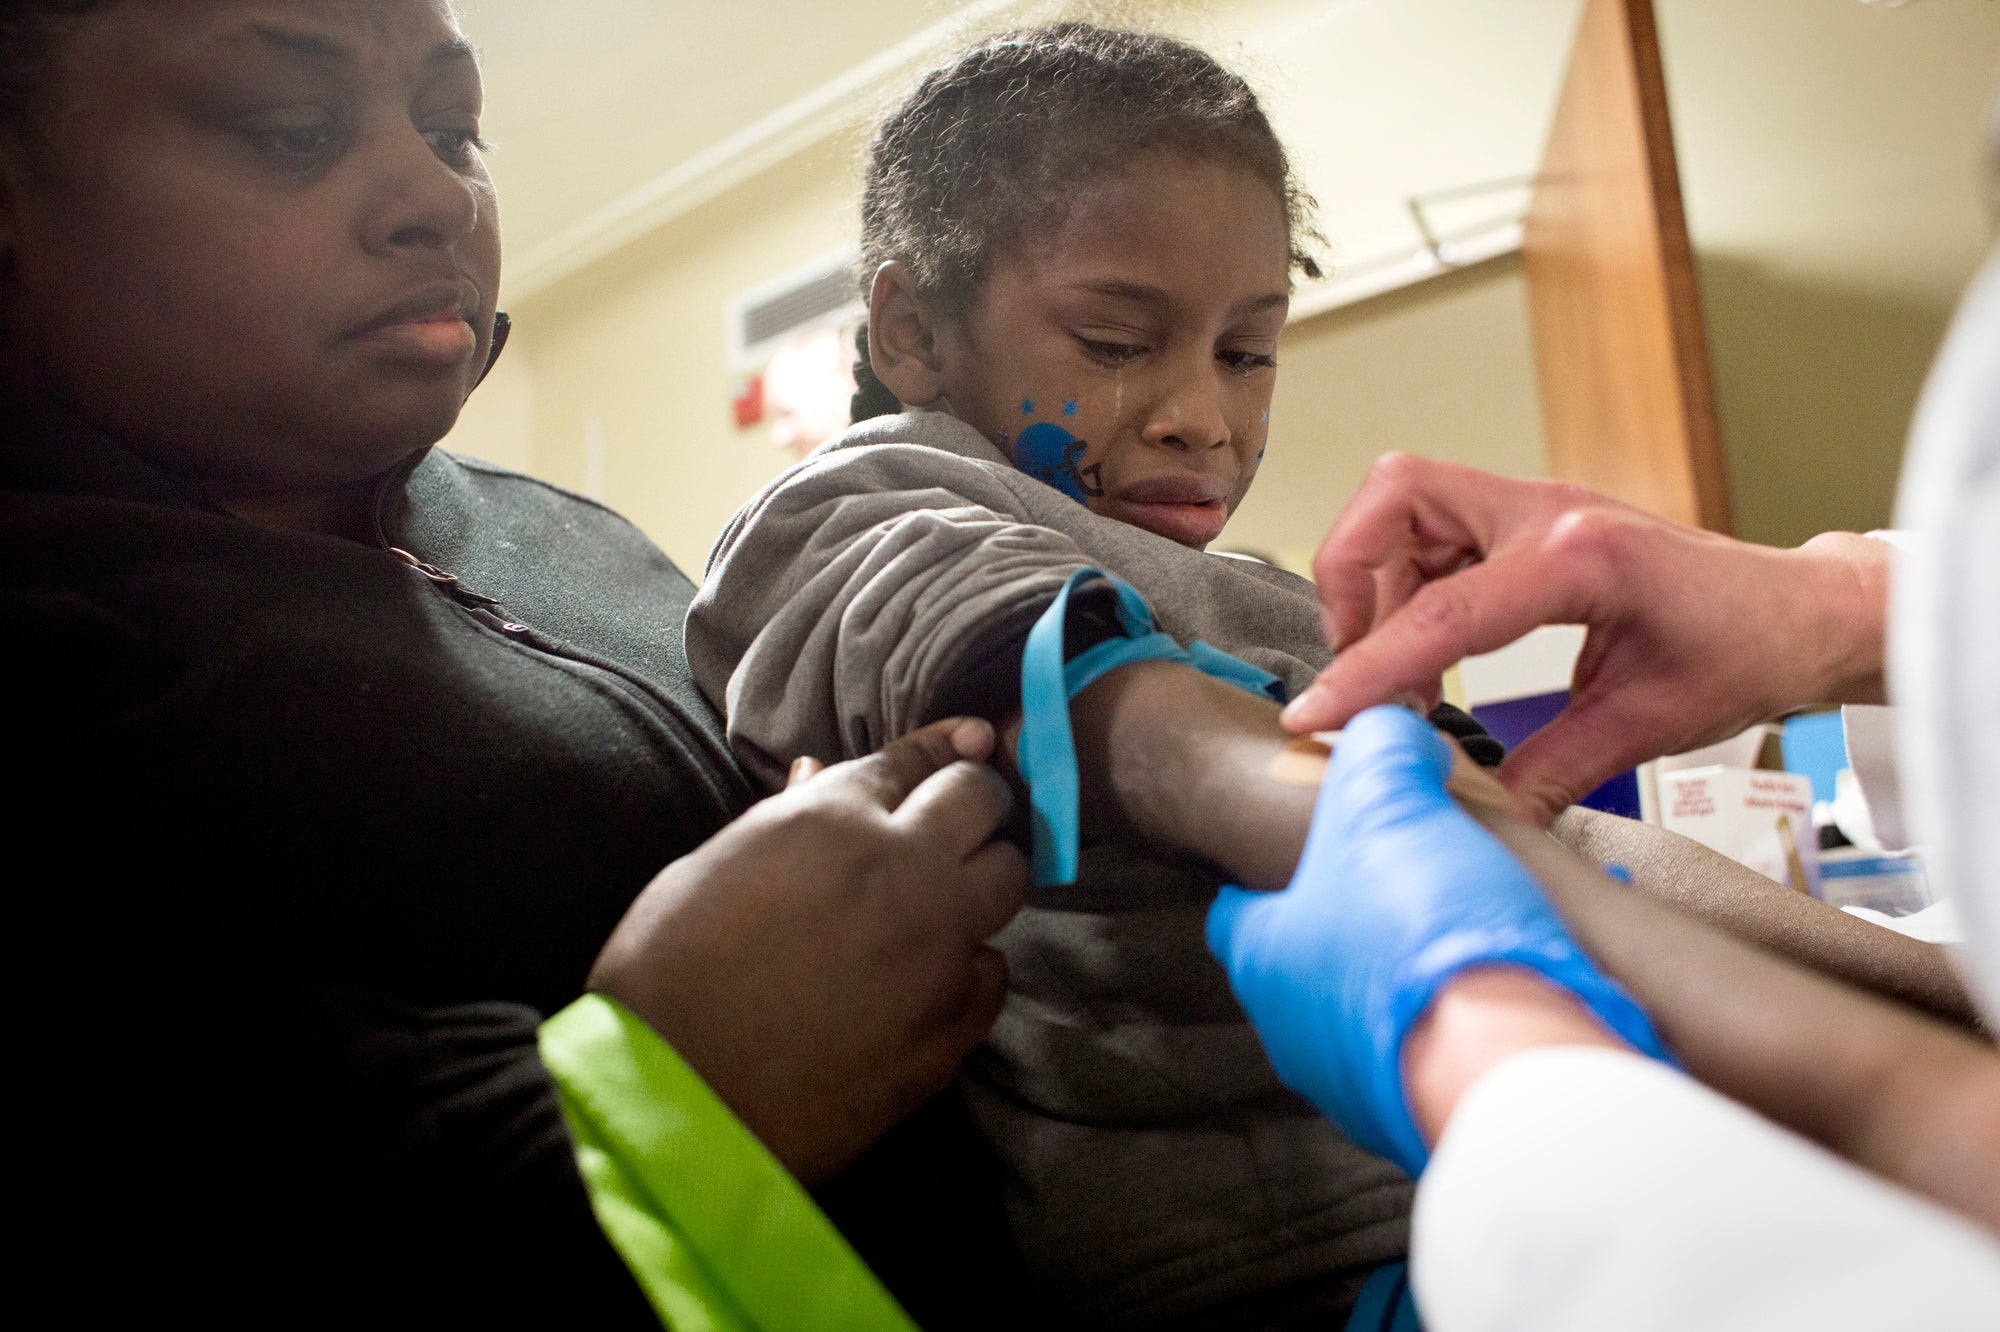 A small boy cries as medical staff takes a blood sample